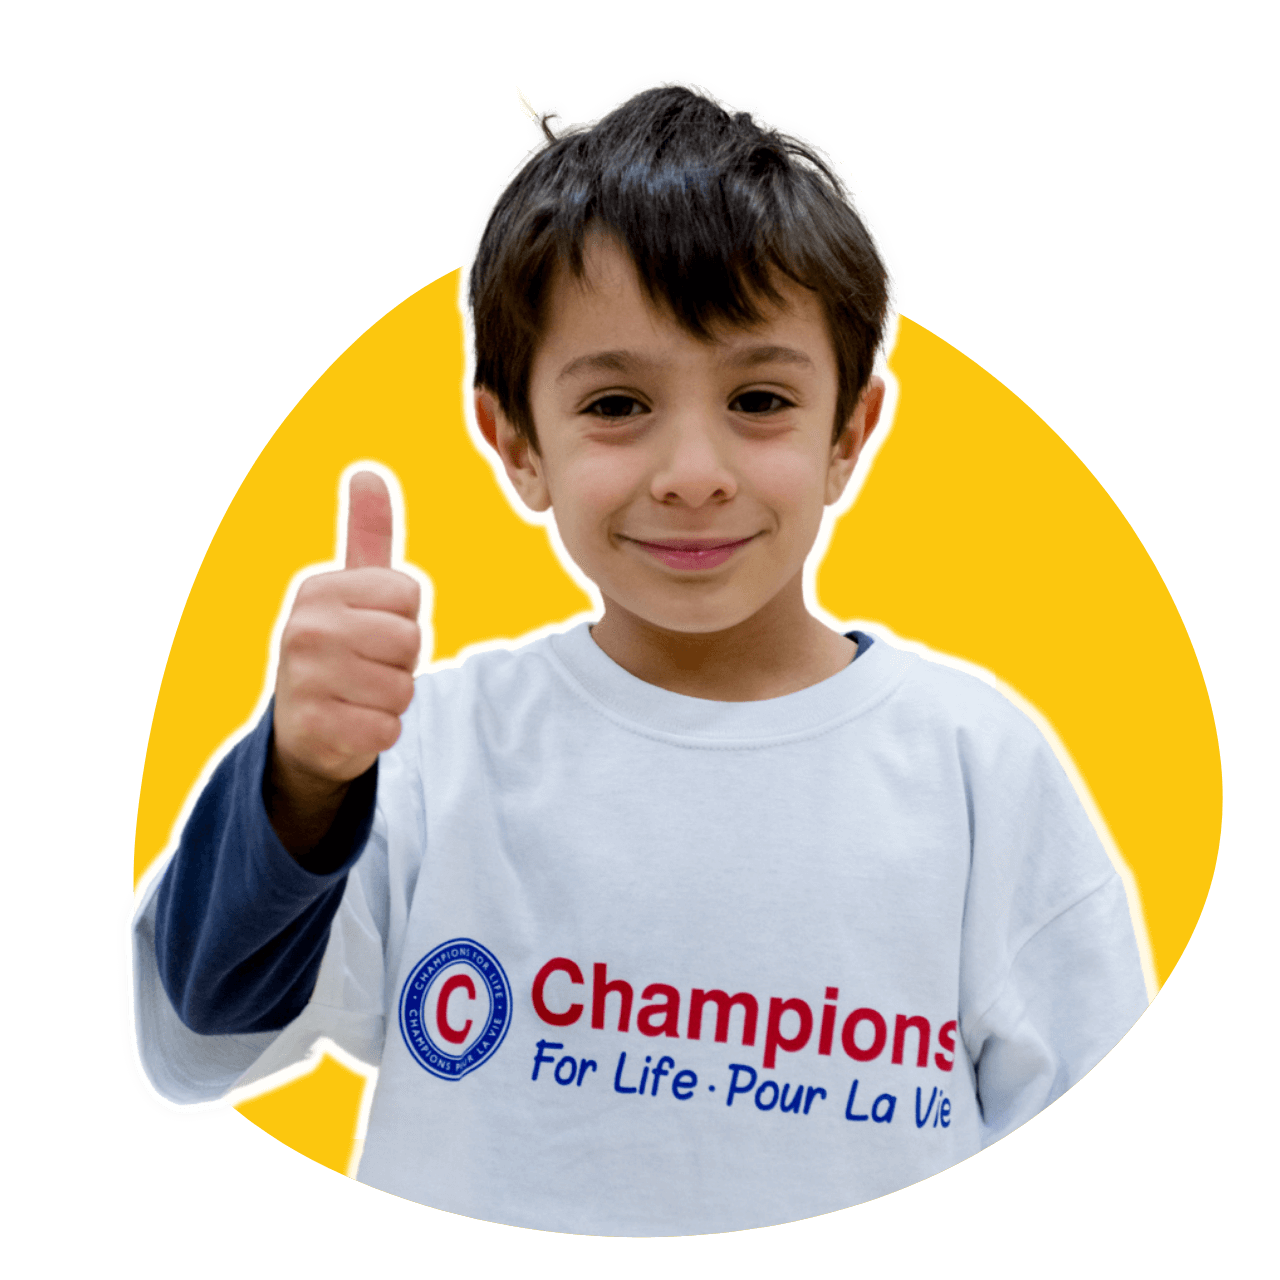 Make a gift of securities to the Champions for Life Foundation